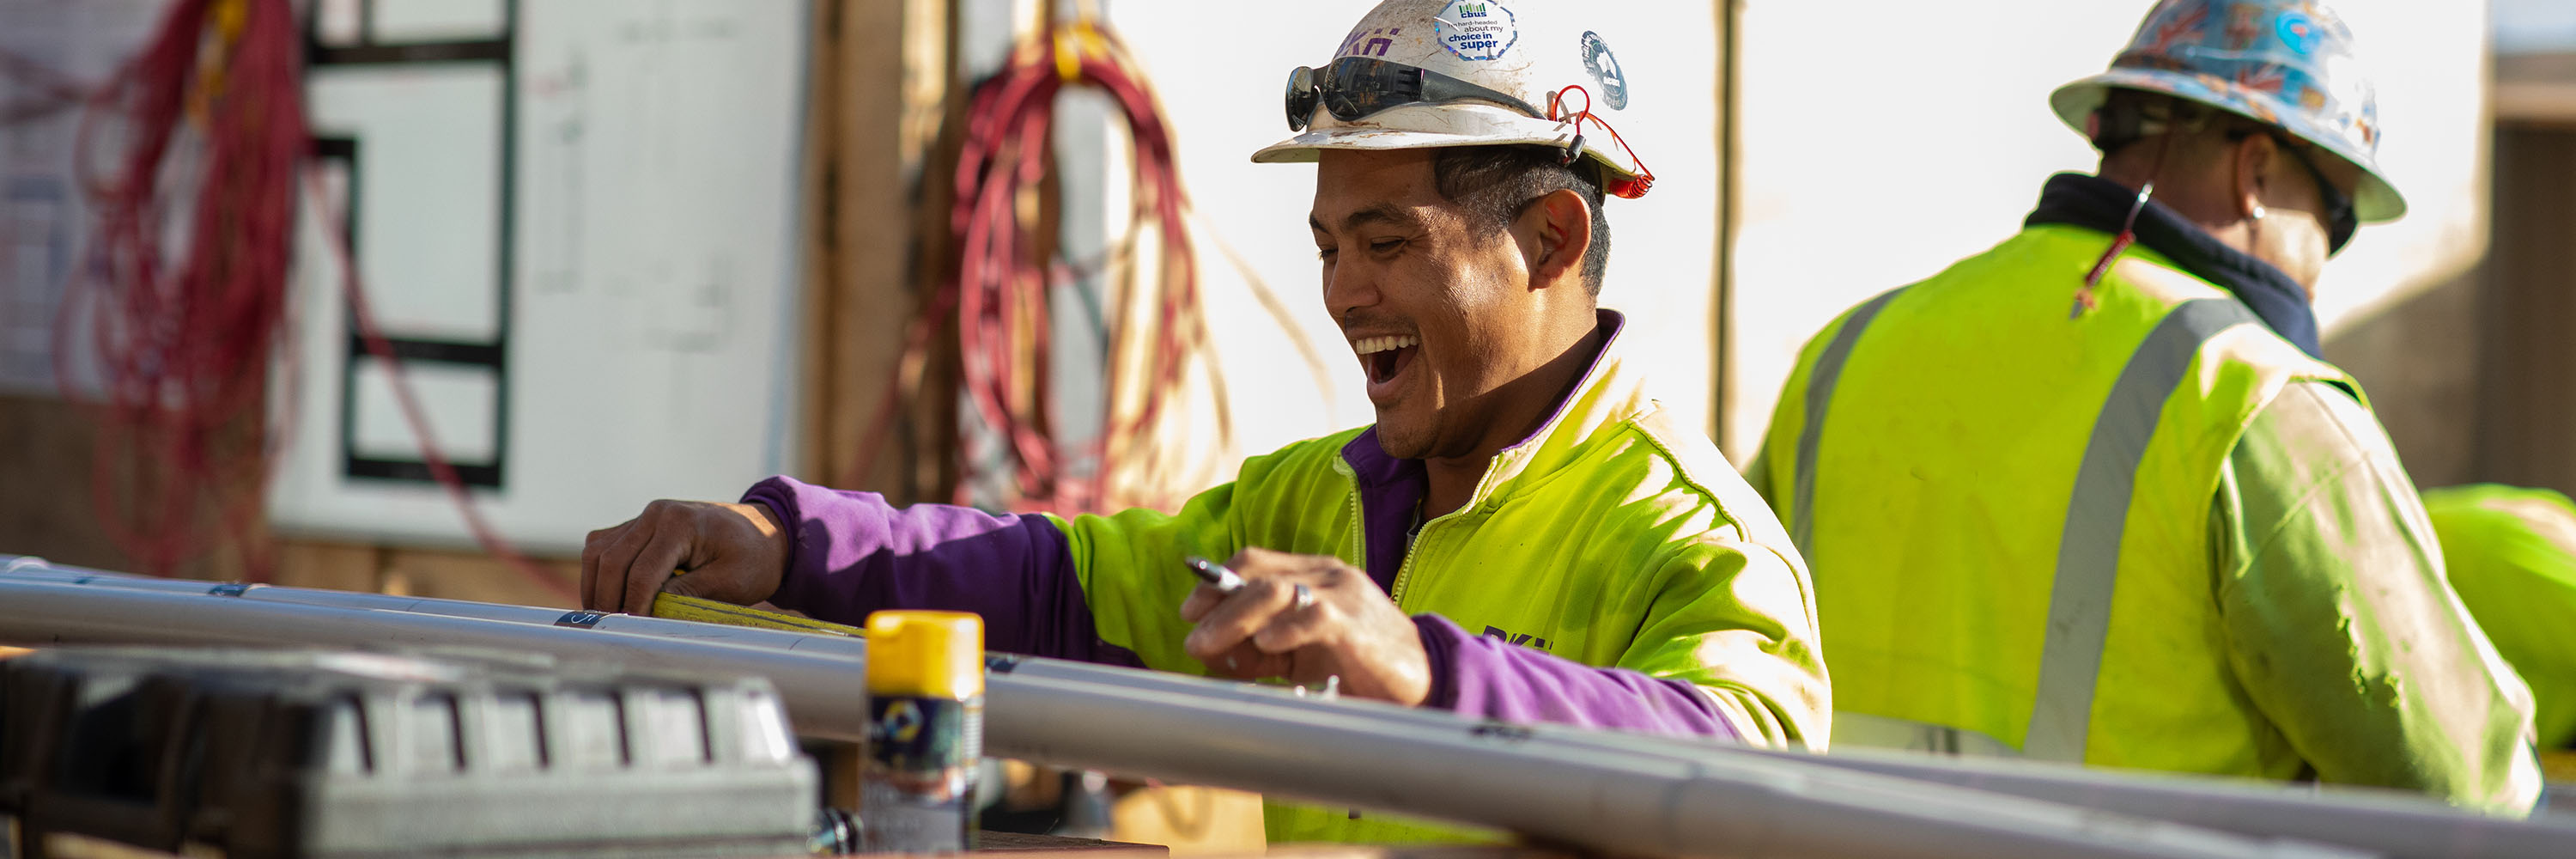 Cbus worker smiling while on job site